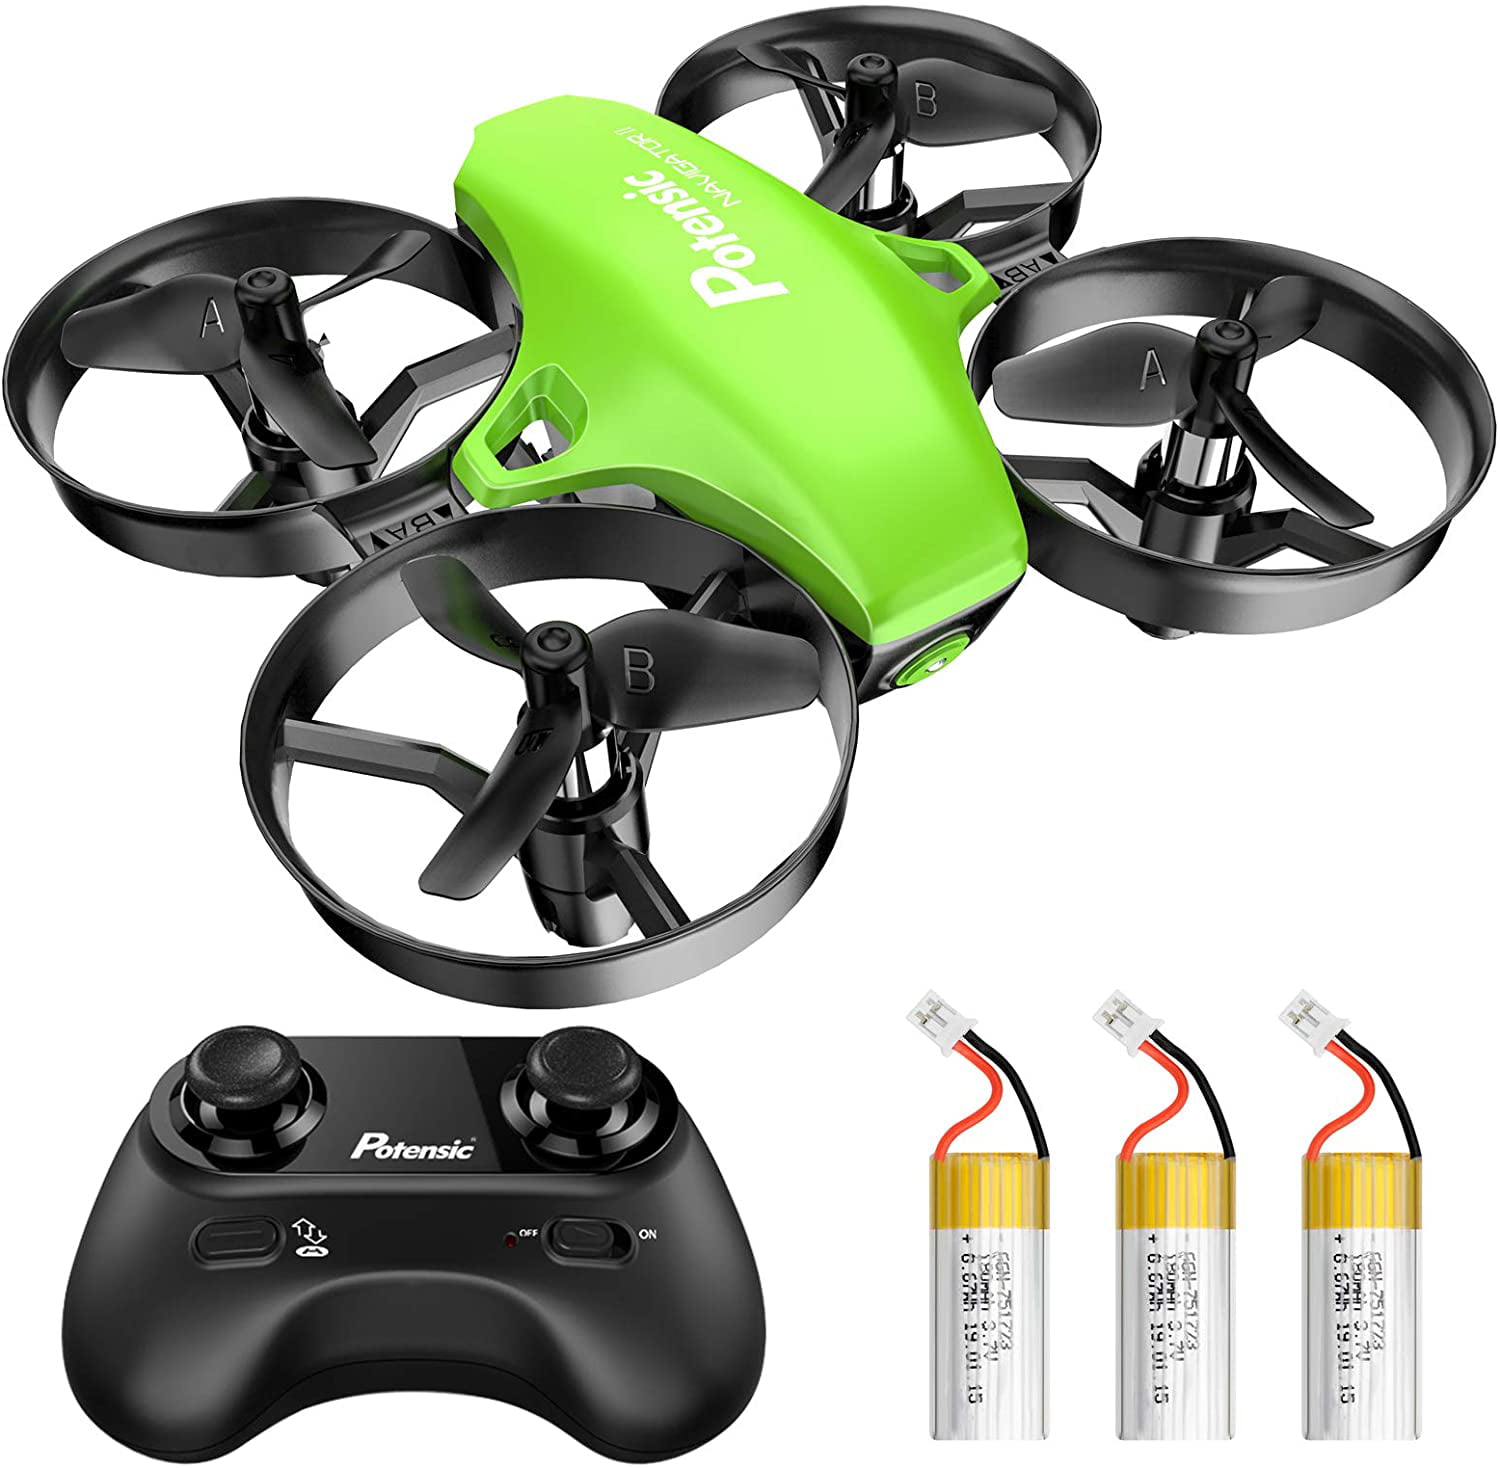 Potensic A20 Mini Drone for Kids and Beginners